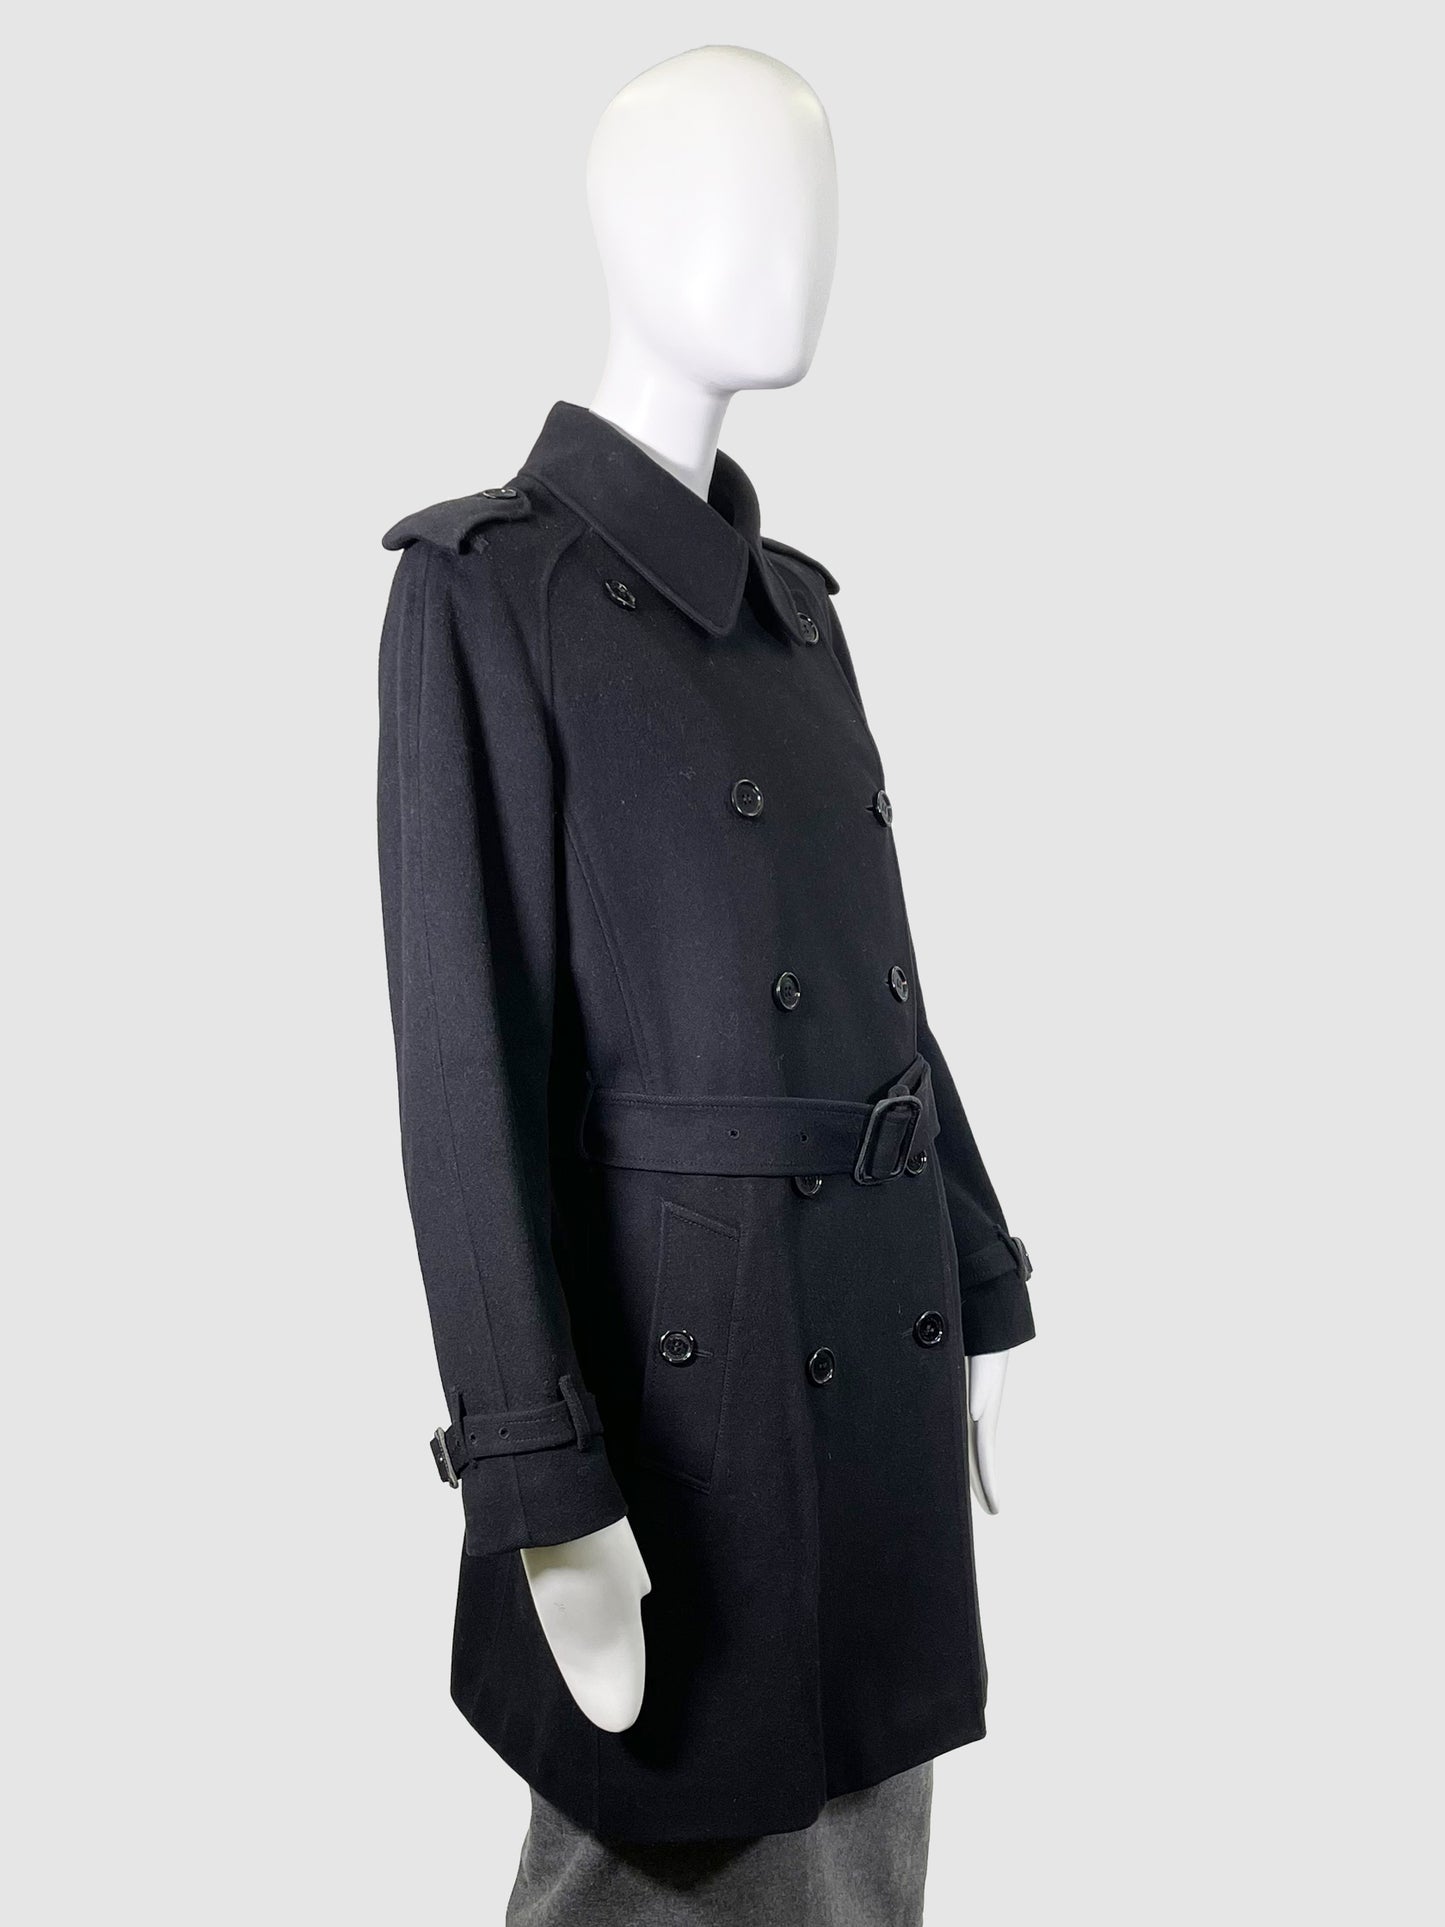 Burberry Wool and Cashmere Coat - Size 10